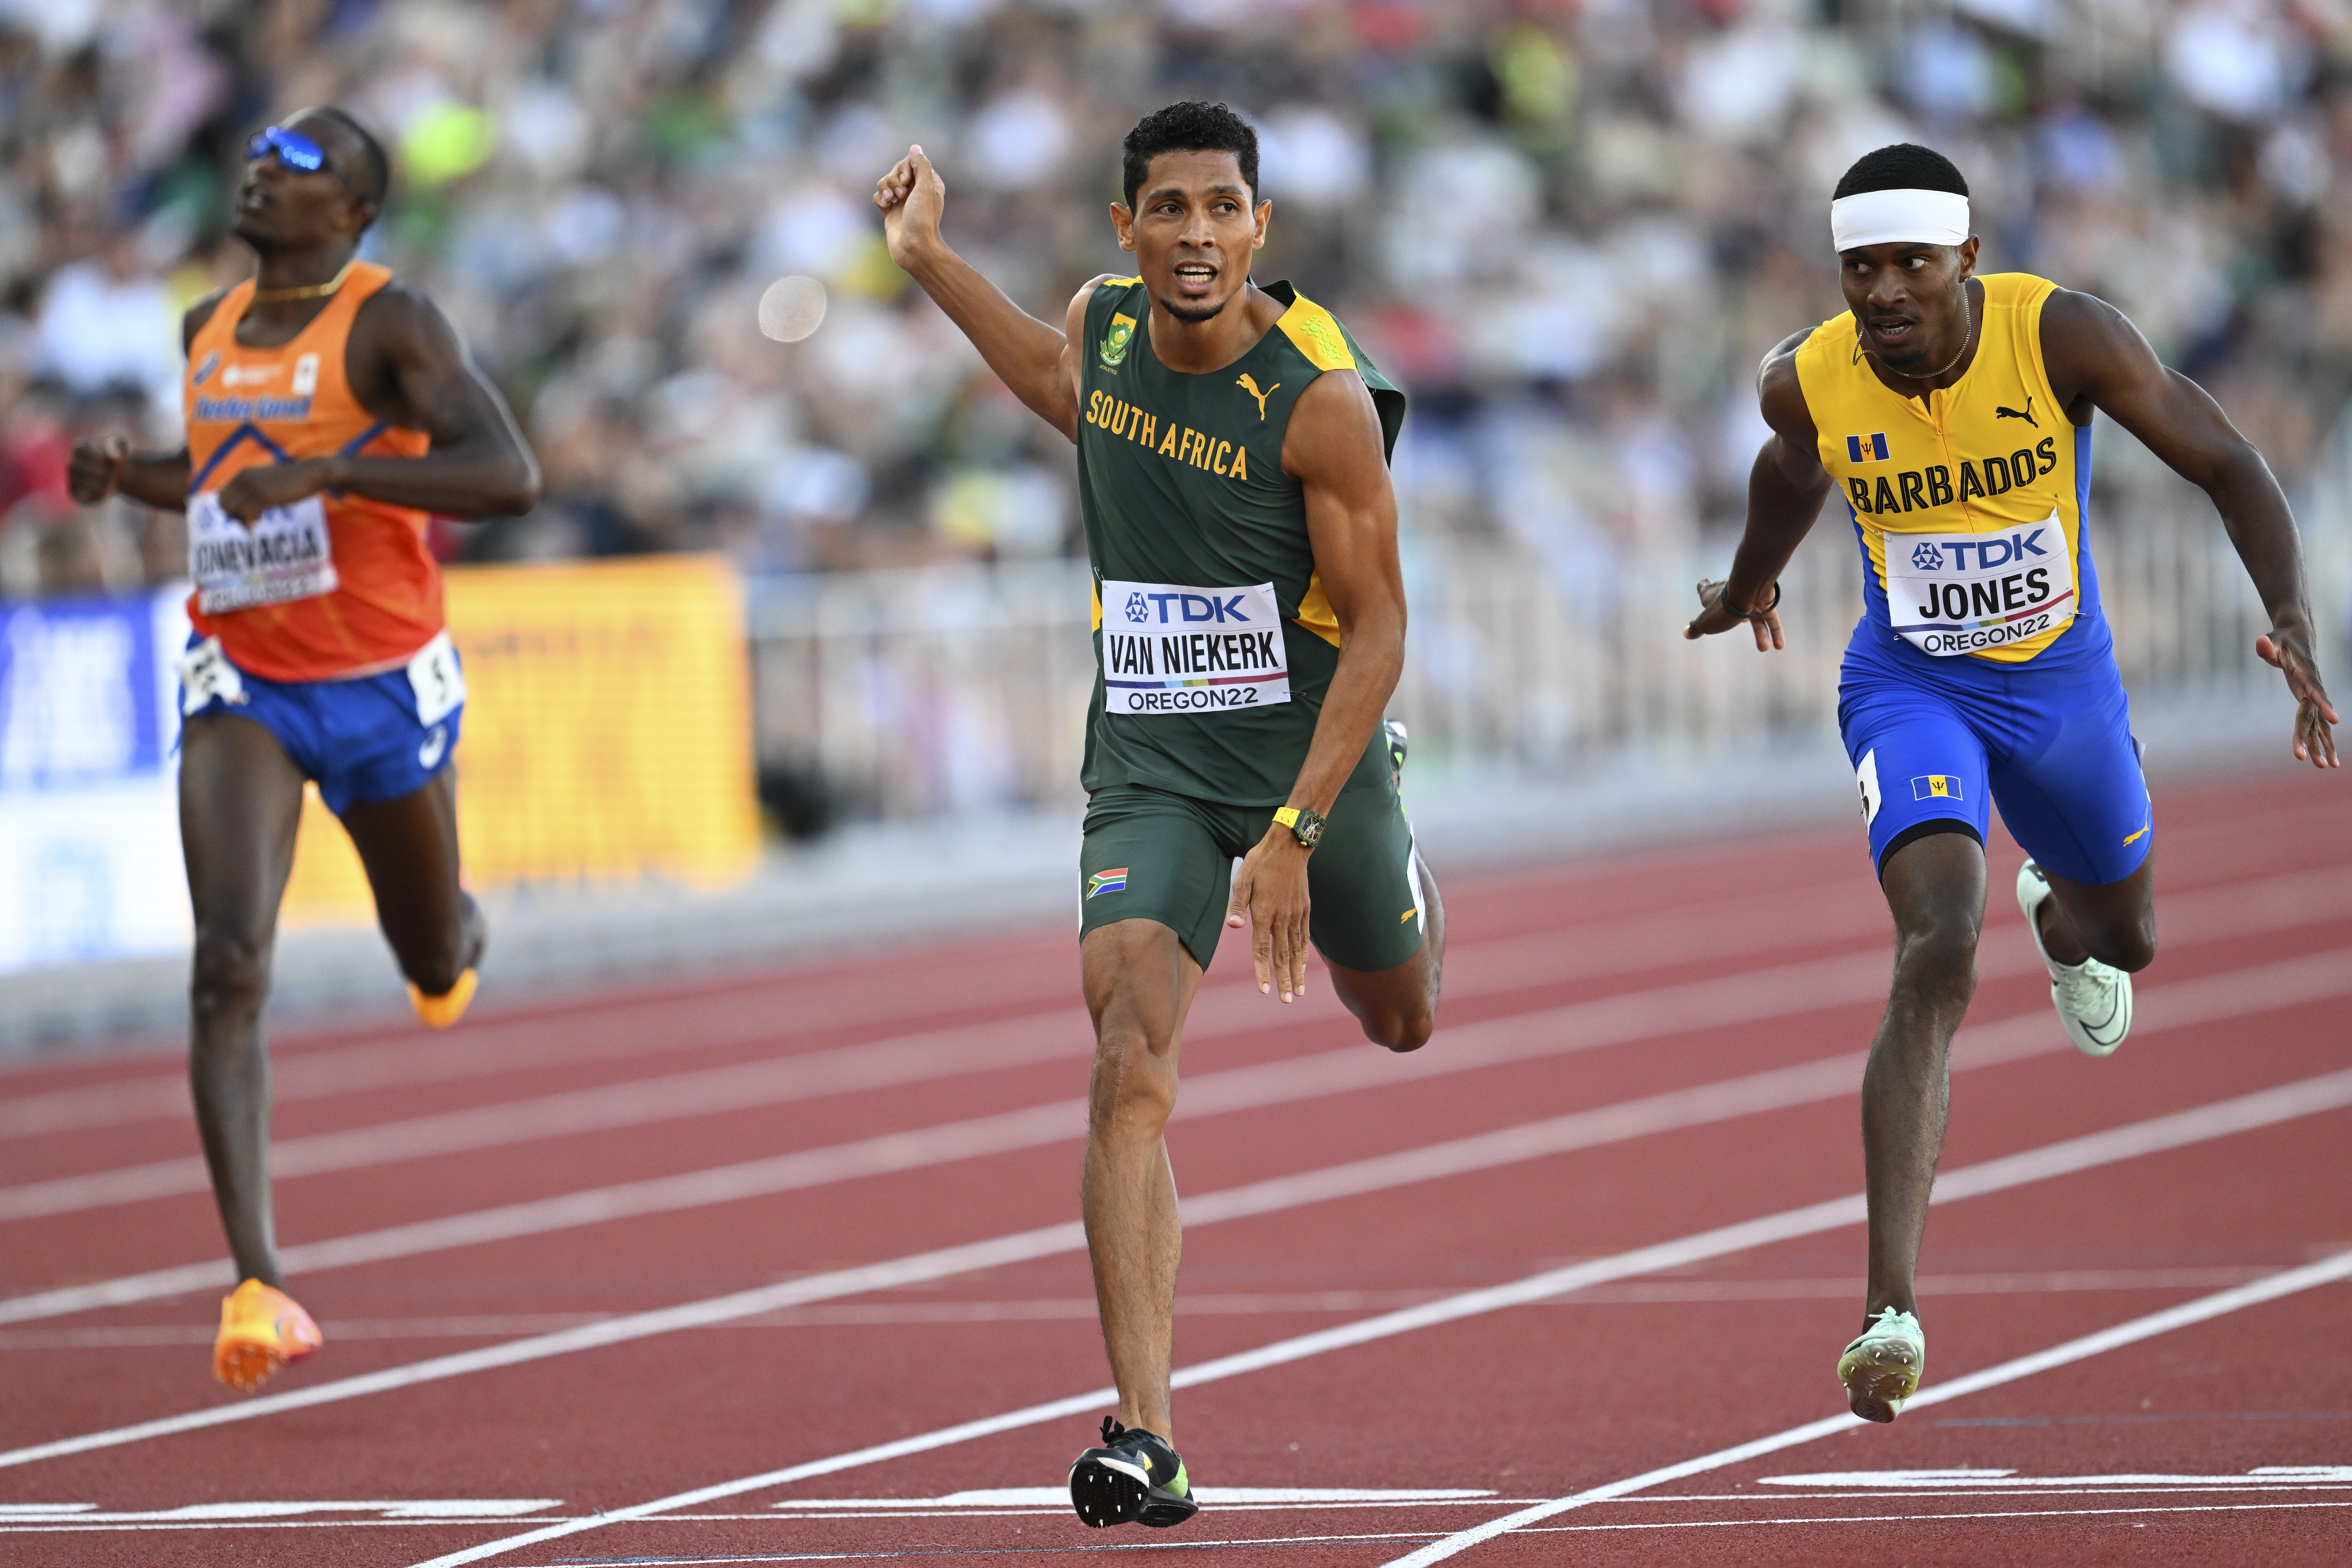 Record number of countries win gold at World Athletics Championships  Oregon22, News, Oregon 22